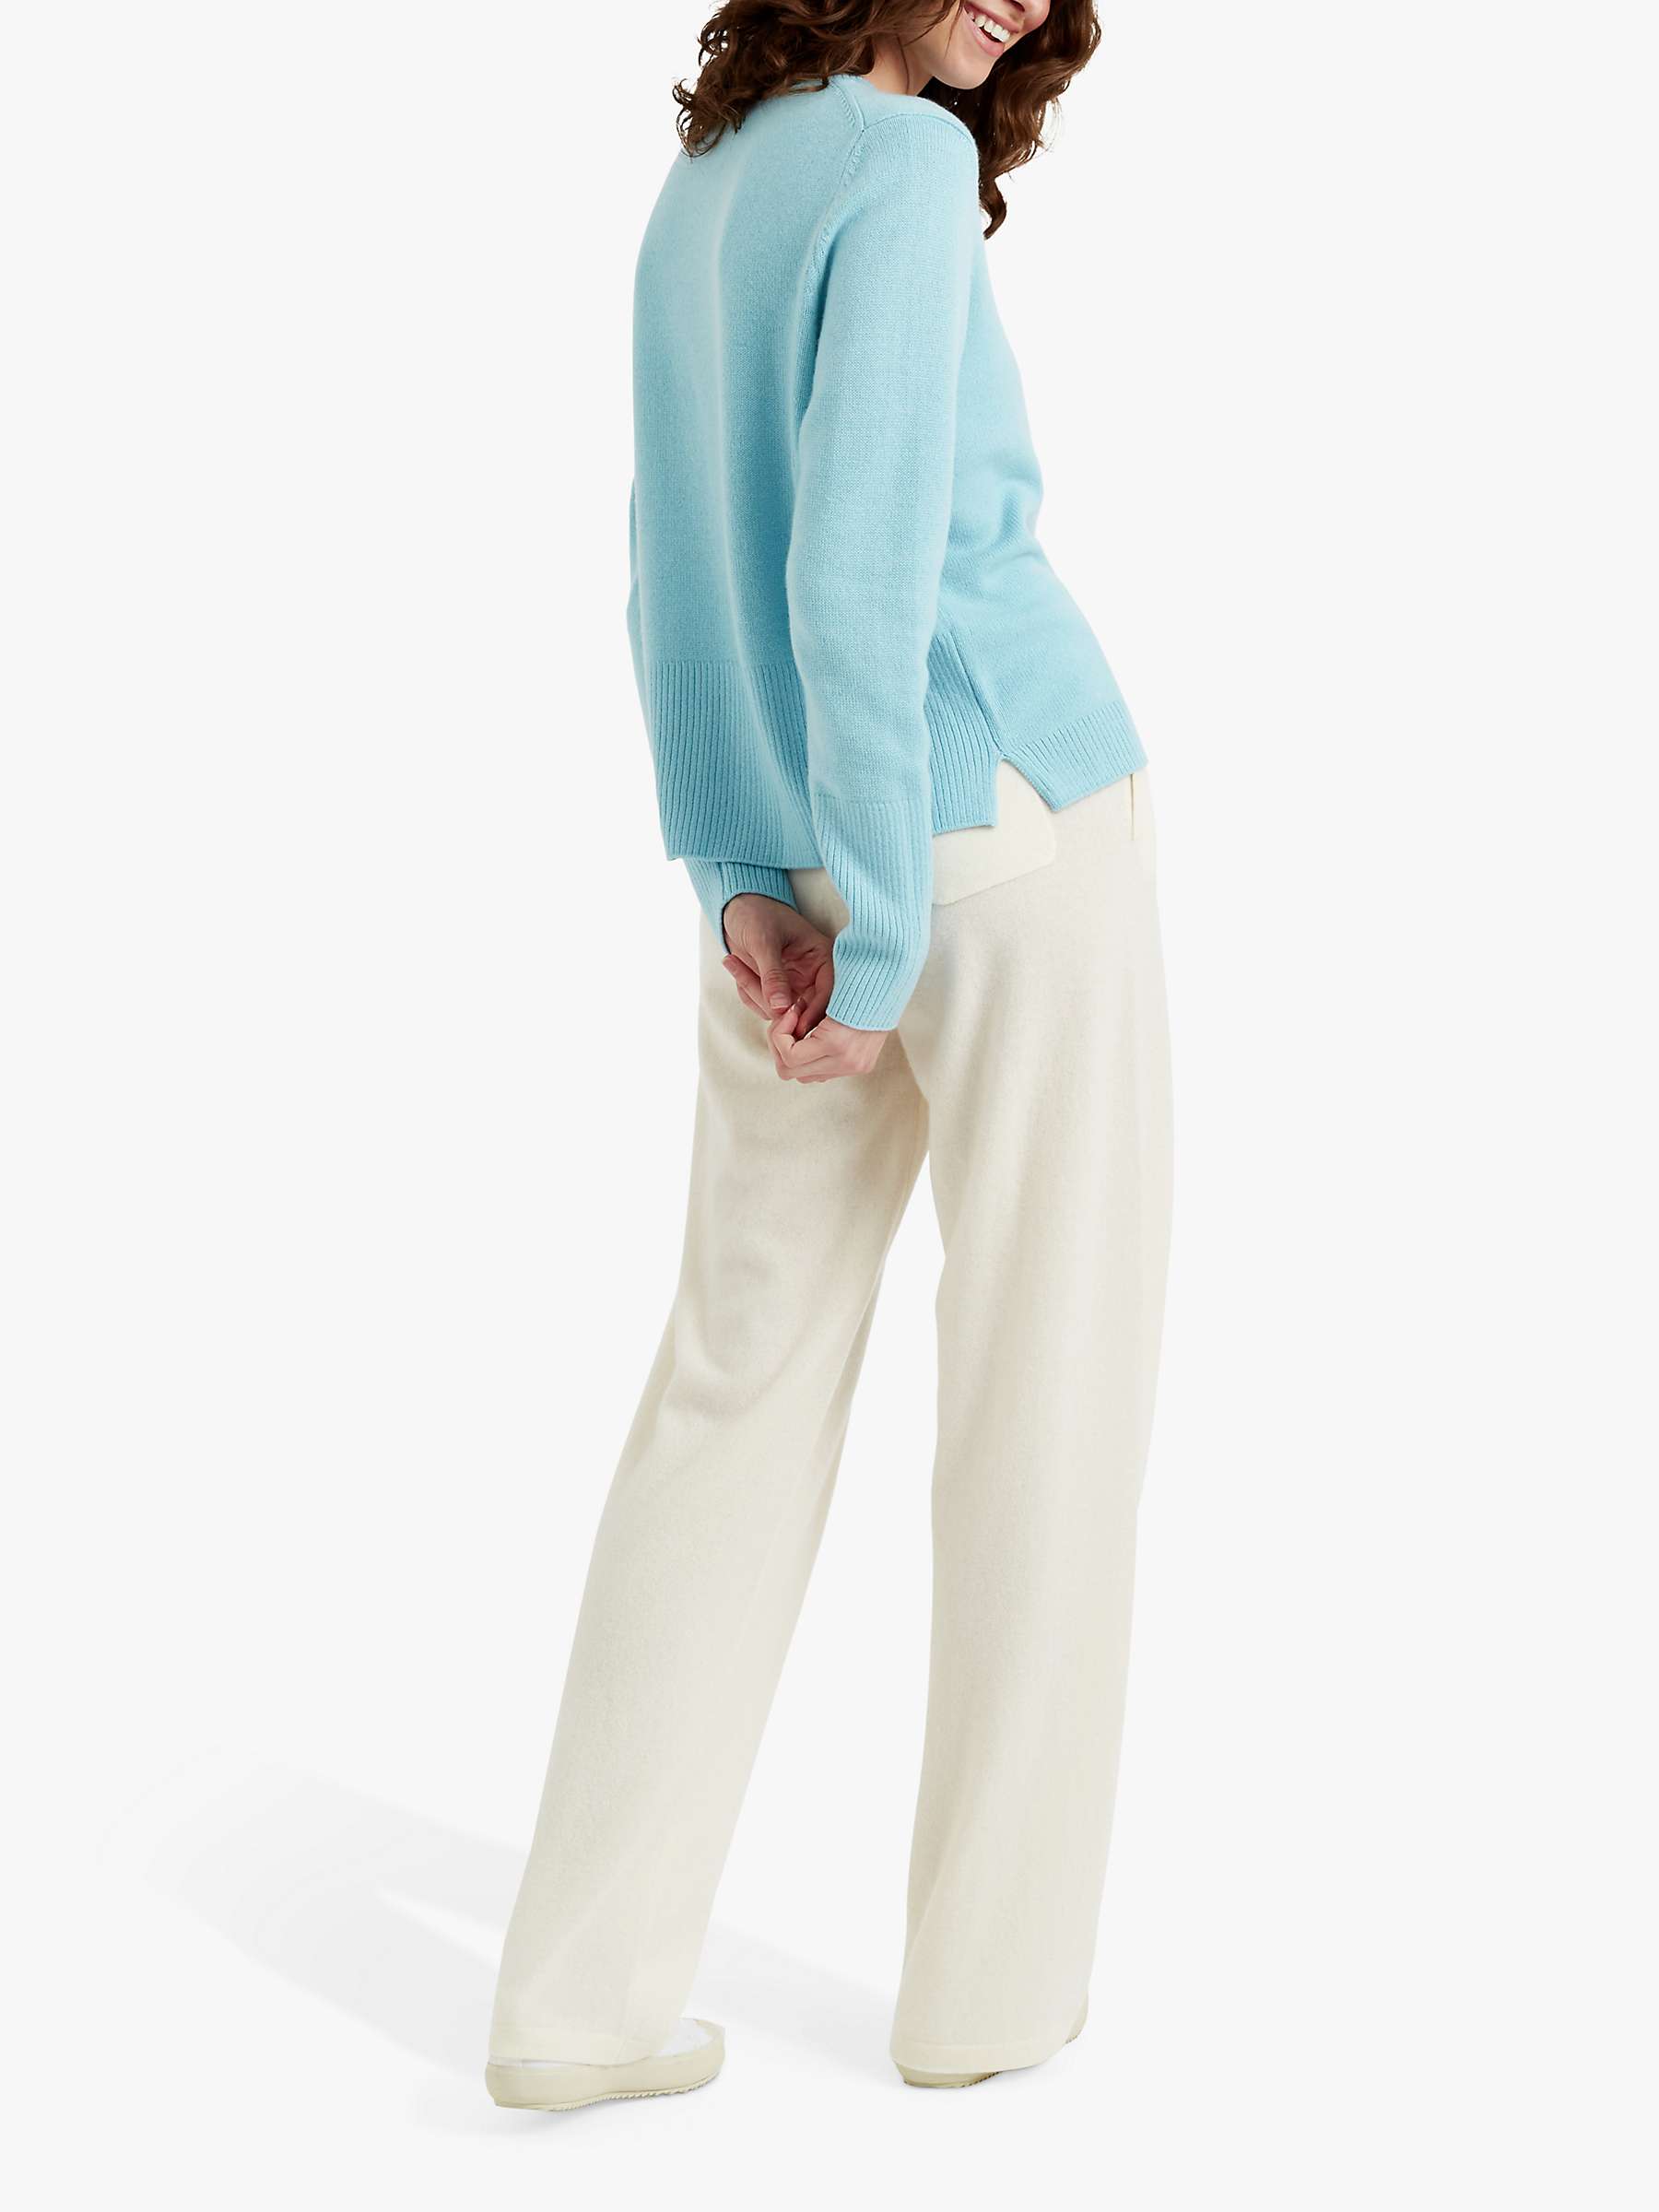 Buy Chinti & Parker Cashmere Boxy Jumper Online at johnlewis.com